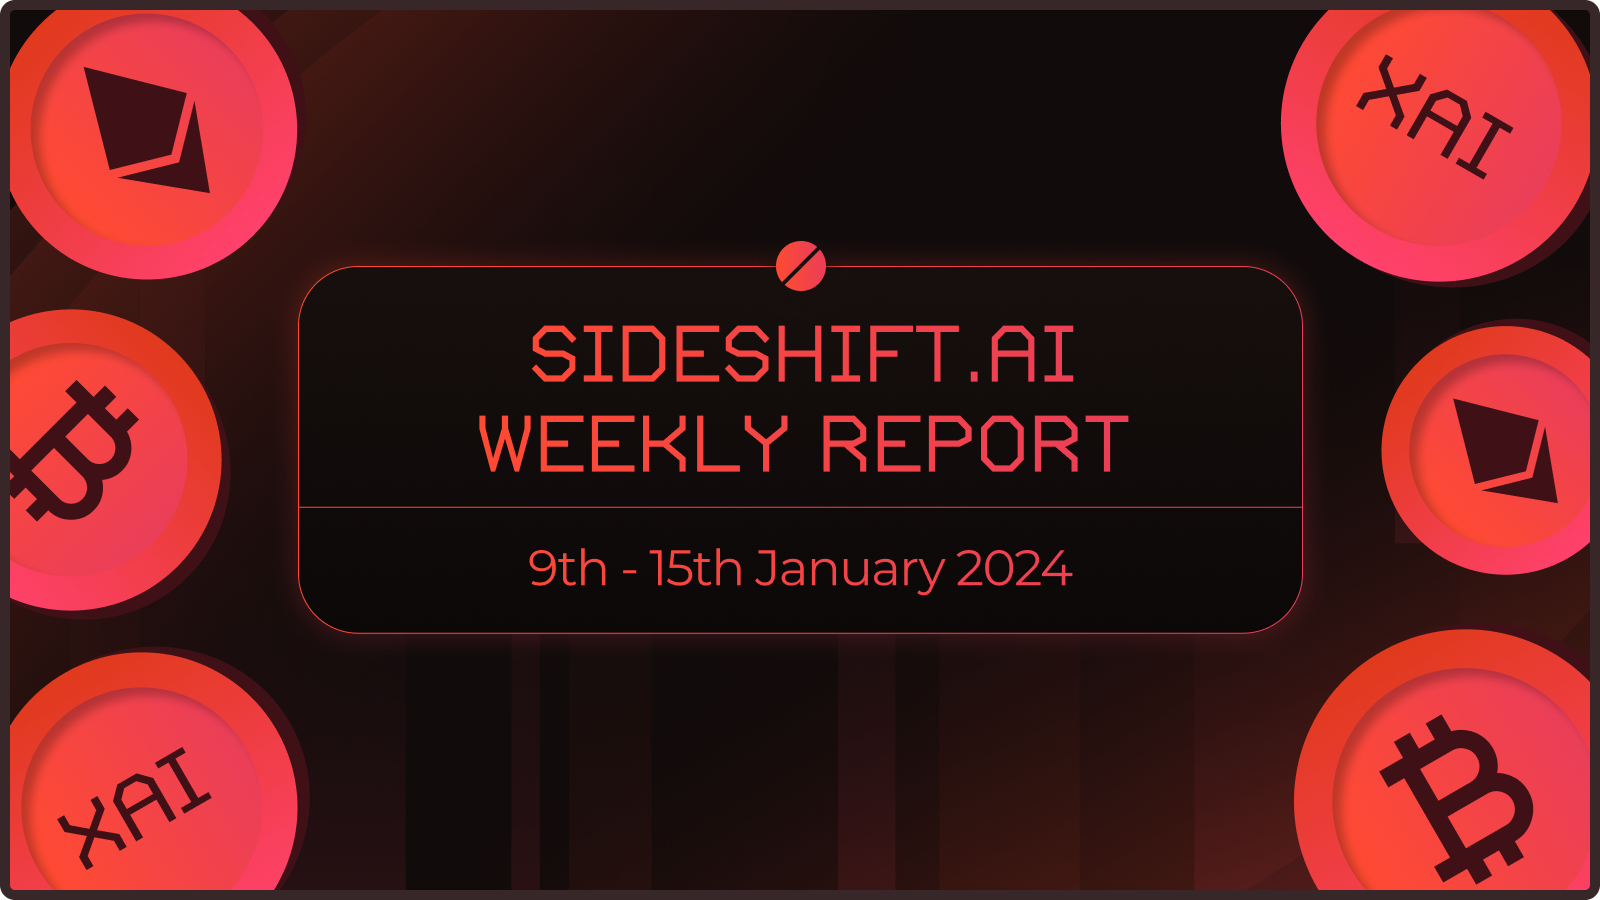 SideShift.ai Weekly Report | 9th - 15th January 2024